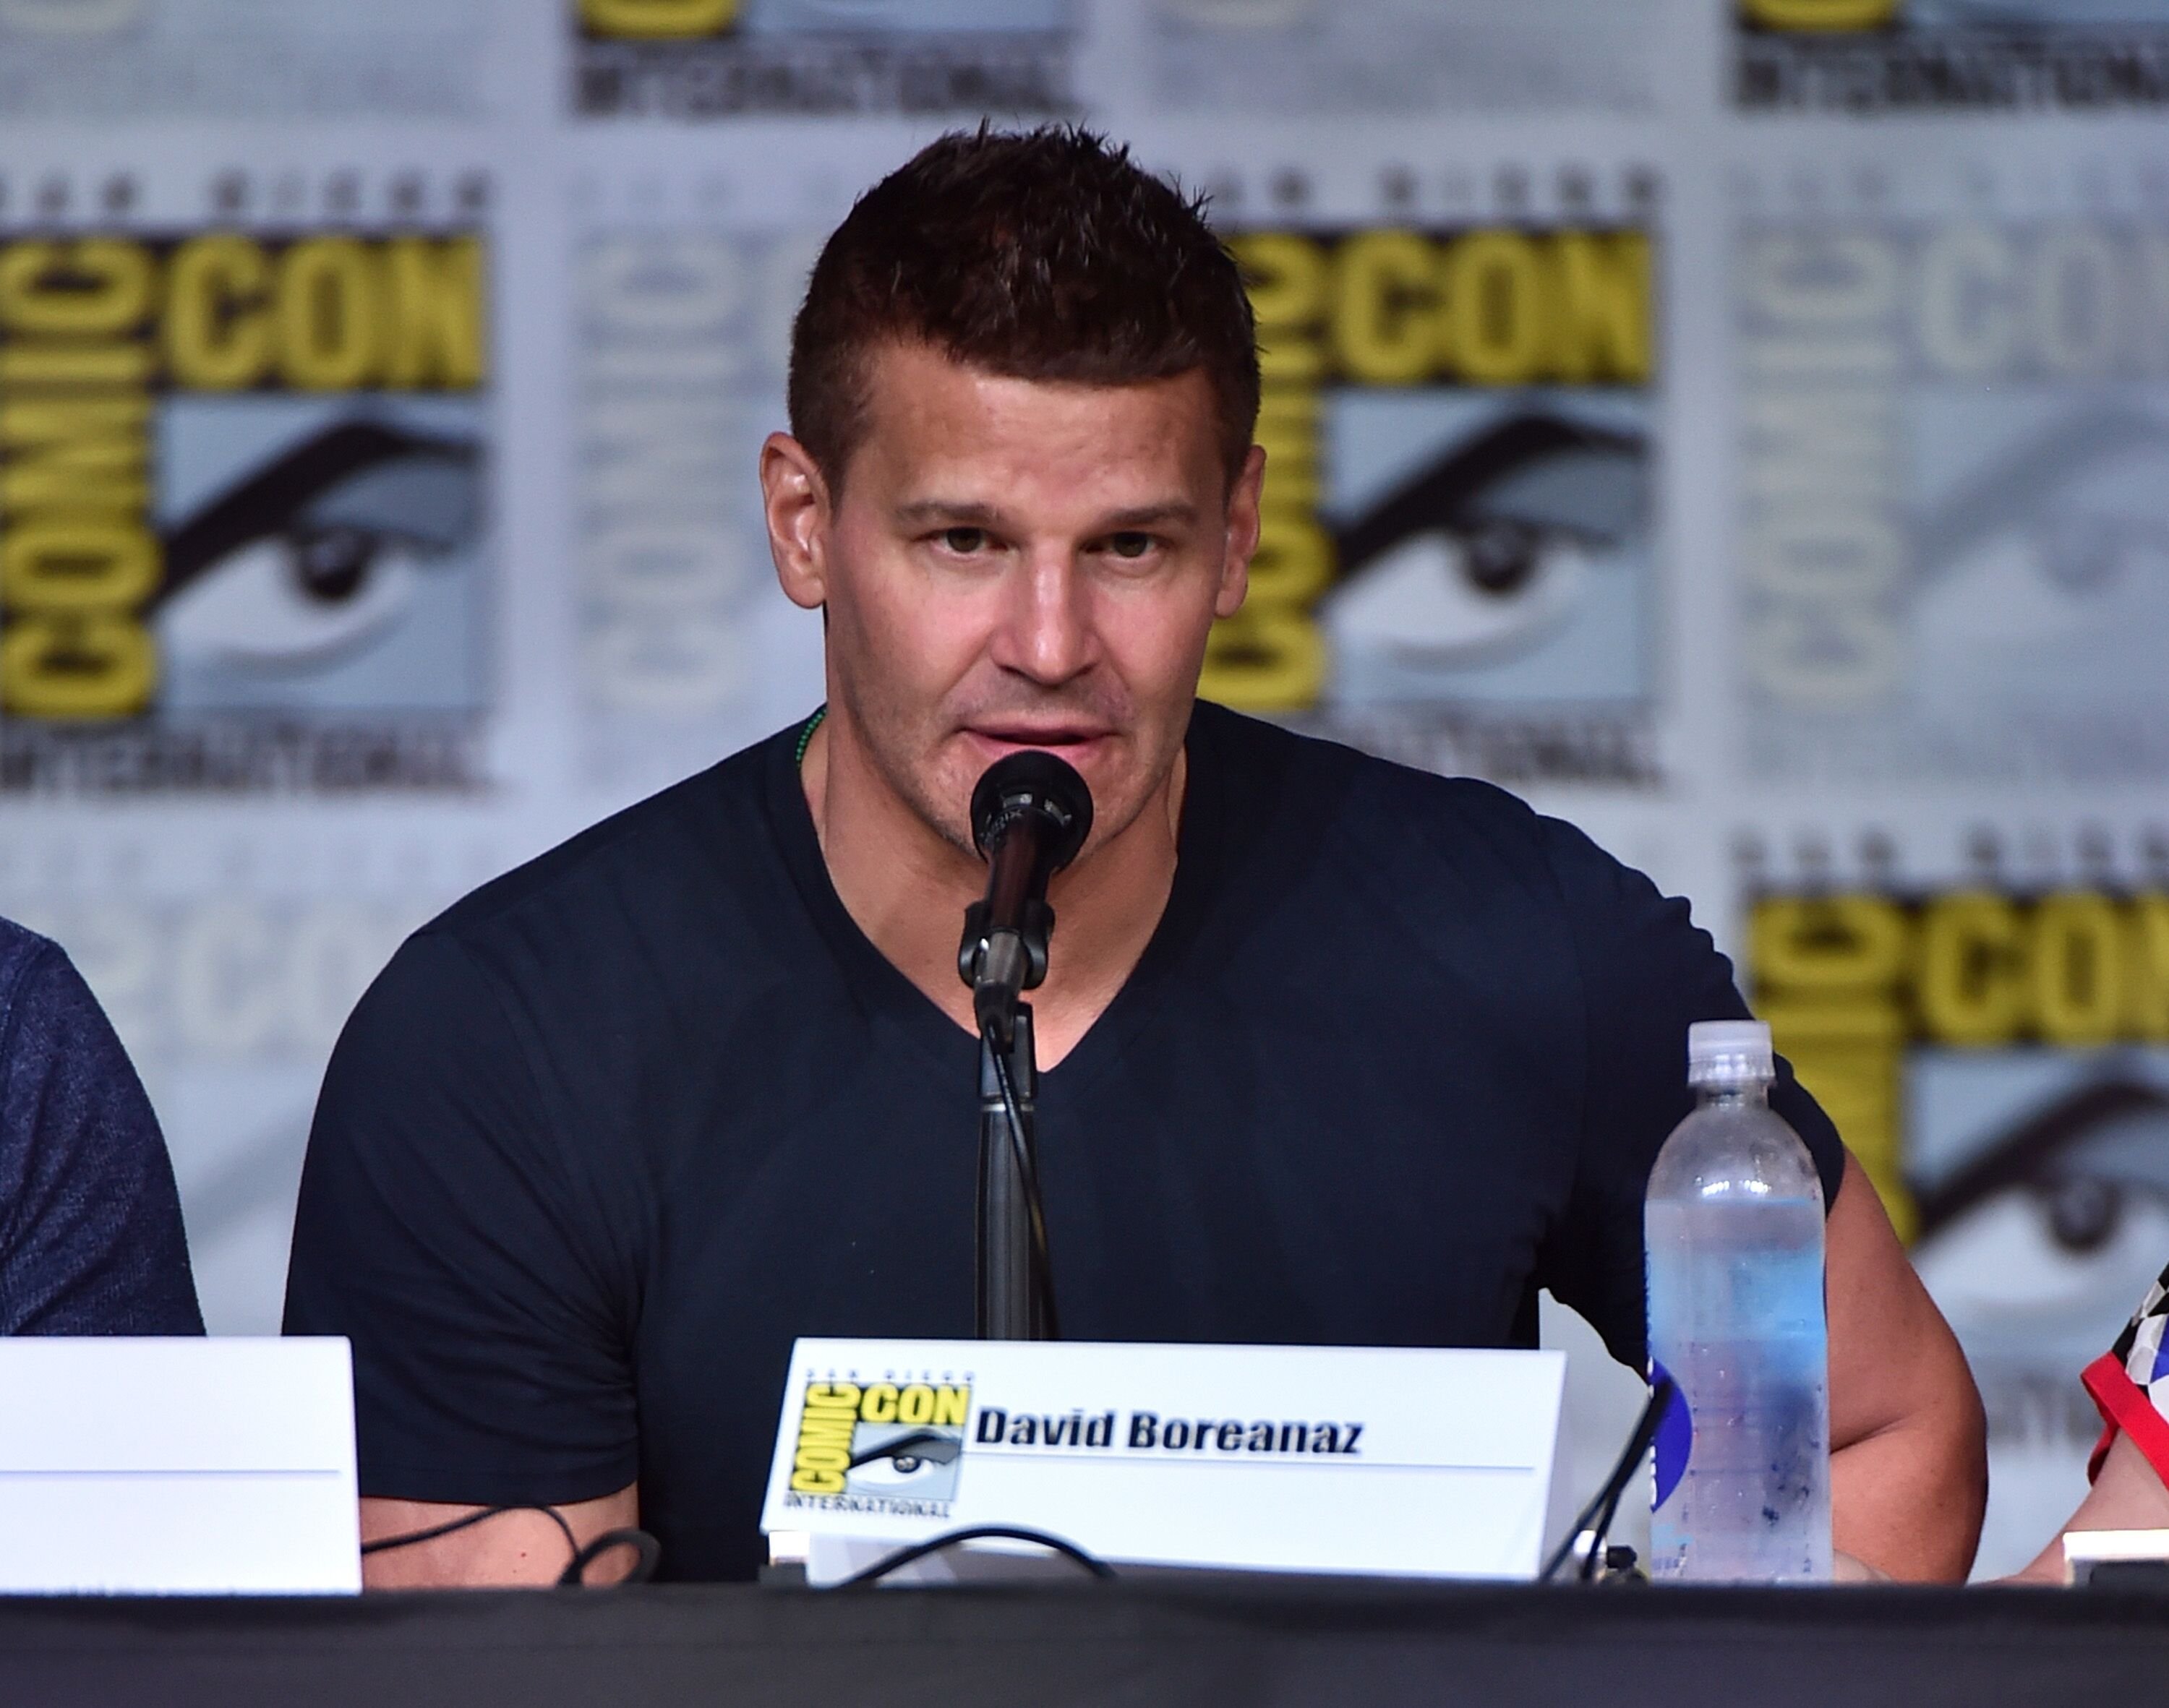 David Boreanaz attends the "Bones" panel during Comic-Con International 2016. | Source: Getty Images